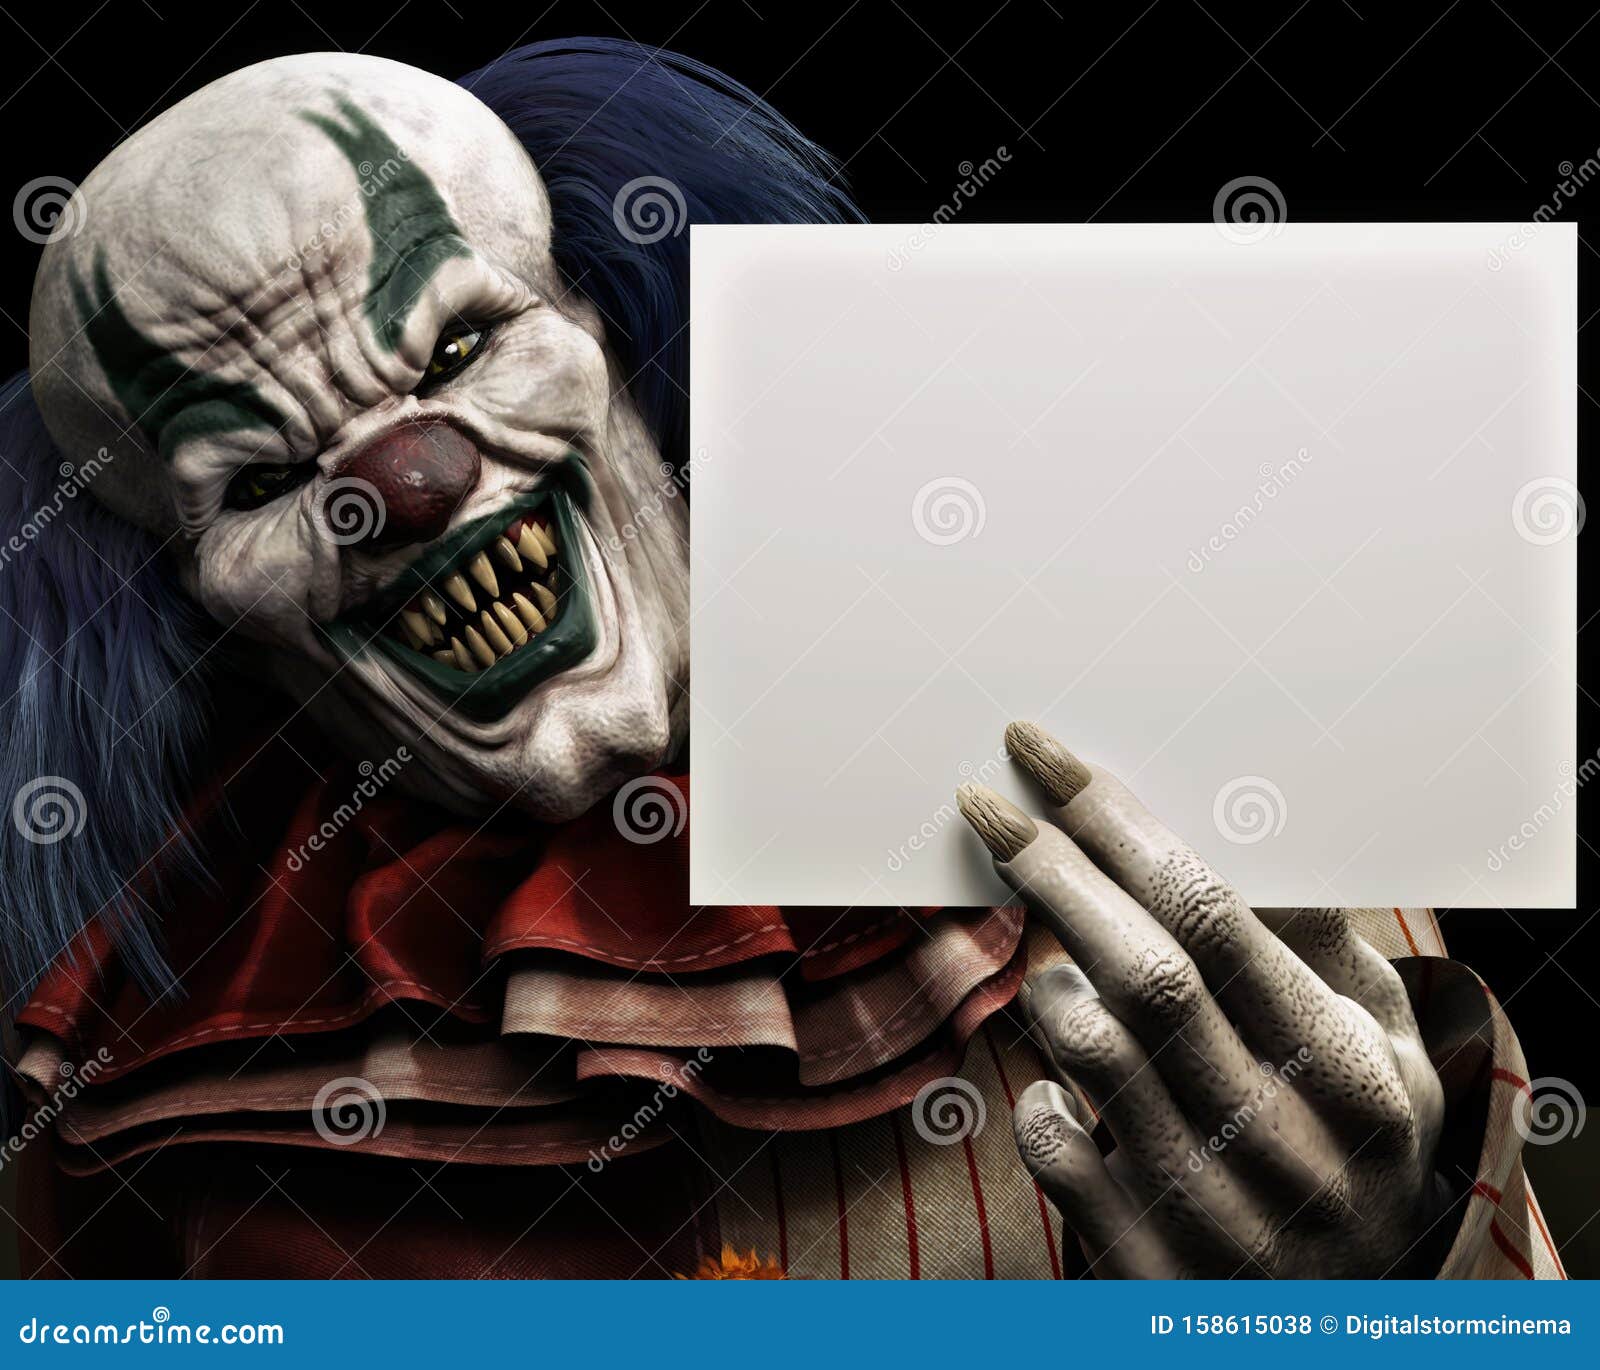 frightening scary clown with sharp fangs piercing the darkness holding a black advertisement card with room for your text